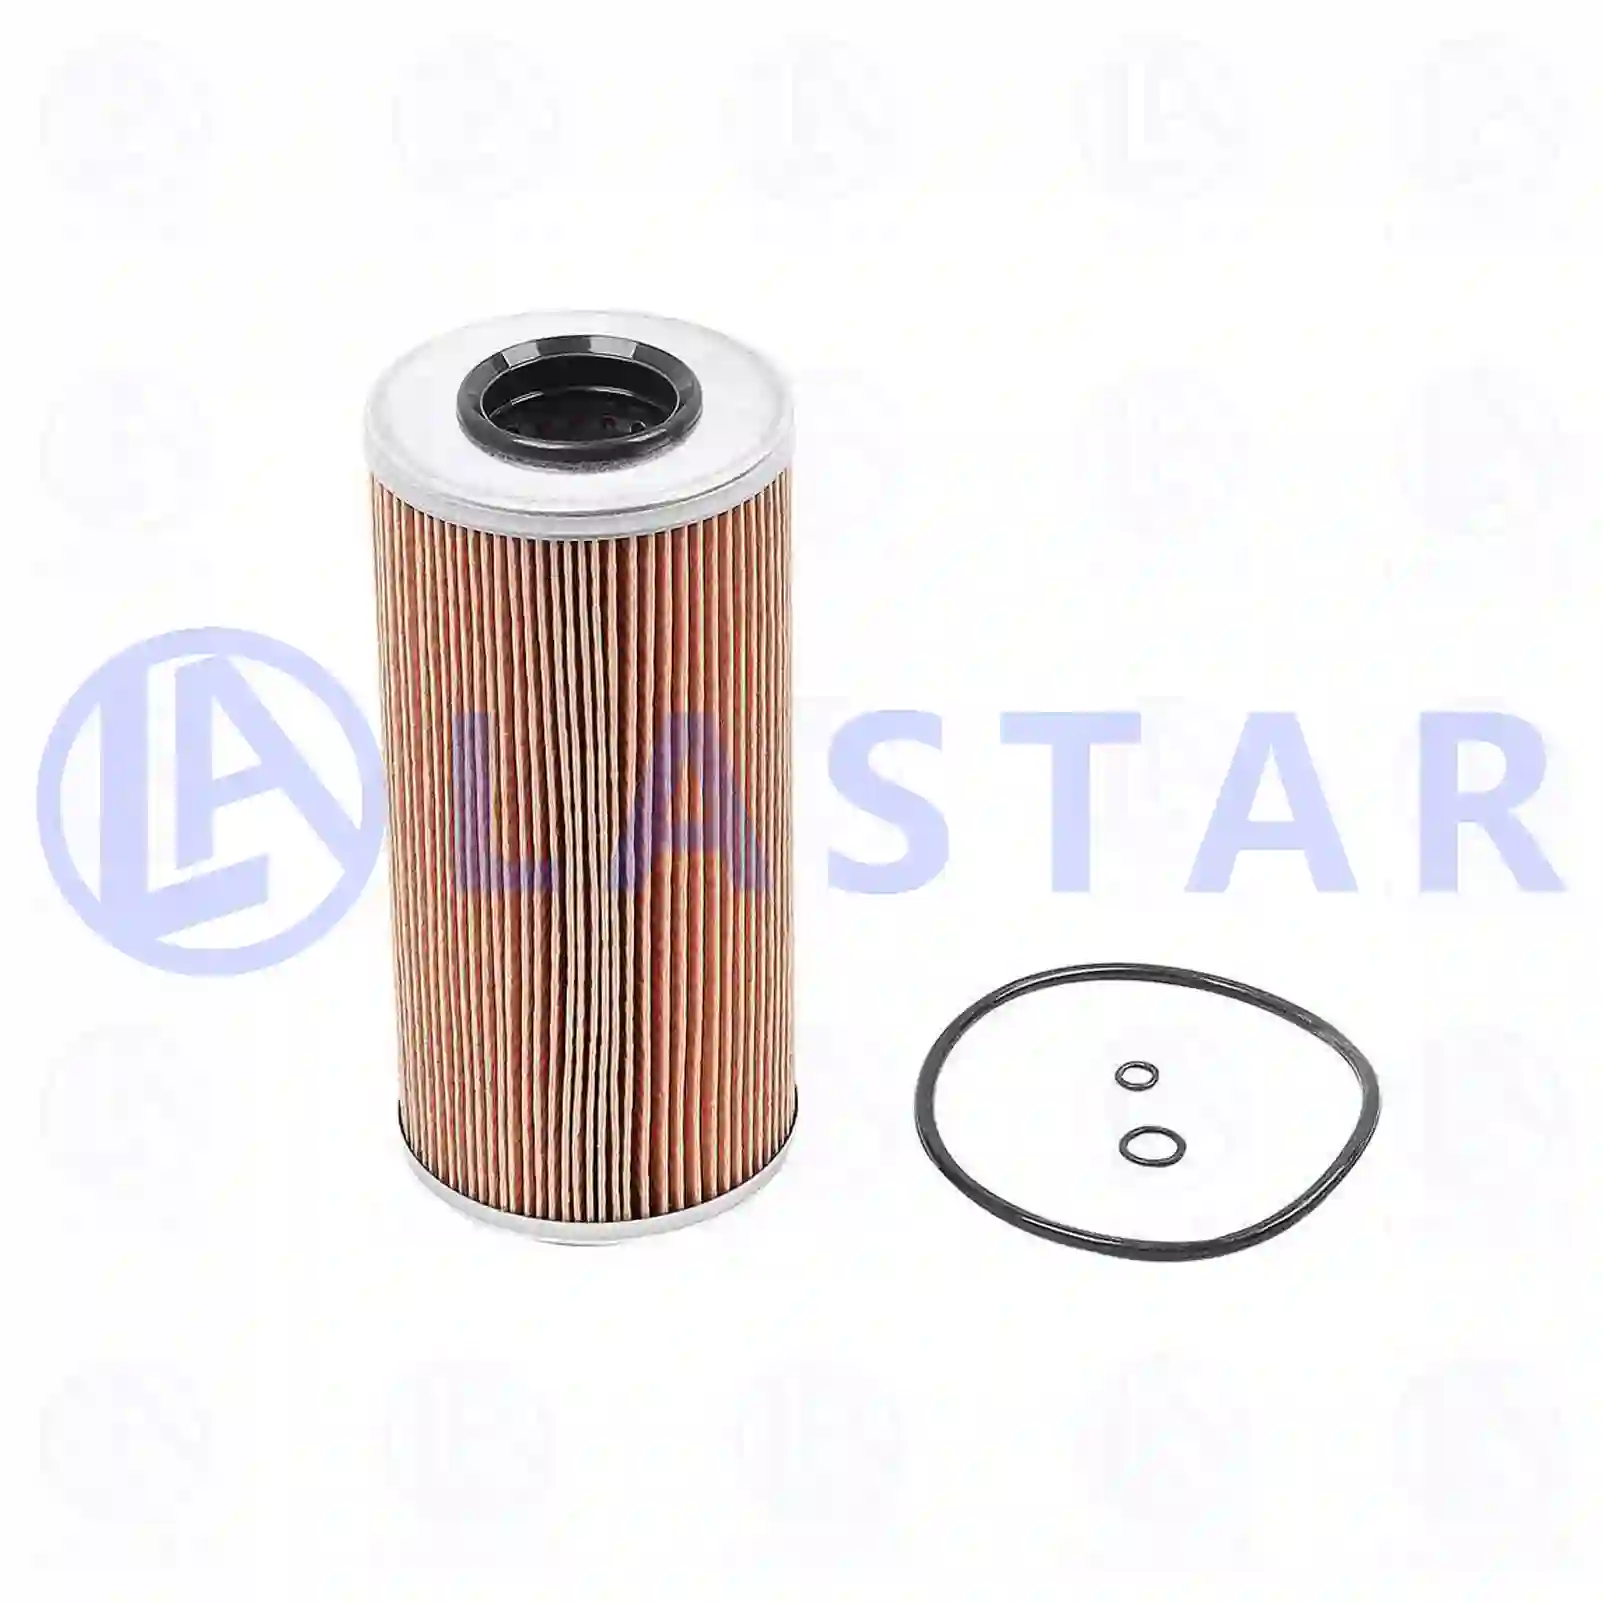 Oil filter insert, 77702106, 6021800009, 6061800009, 6061840025, 6061840125, 6061840225, F926202510010, 51055006073, 51055040105, 6021800009, 6021840025, 6061800009, 606180000967, 6061800109, 6061800910, 6061840025, 6061840125, 6061840225, 6281800009, 6281800109, 6281840025, 6005019830, 6061800009ME, 6611803209, 6611803309, 6611803409, 6611843325, 6061800009, 07W115436A, ZG01736-0008 ||  77702106 Lastar Spare Part | Truck Spare Parts, Auotomotive Spare Parts Oil filter insert, 77702106, 6021800009, 6061800009, 6061840025, 6061840125, 6061840225, F926202510010, 51055006073, 51055040105, 6021800009, 6021840025, 6061800009, 606180000967, 6061800109, 6061800910, 6061840025, 6061840125, 6061840225, 6281800009, 6281800109, 6281840025, 6005019830, 6061800009ME, 6611803209, 6611803309, 6611803409, 6611843325, 6061800009, 07W115436A, ZG01736-0008 ||  77702106 Lastar Spare Part | Truck Spare Parts, Auotomotive Spare Parts